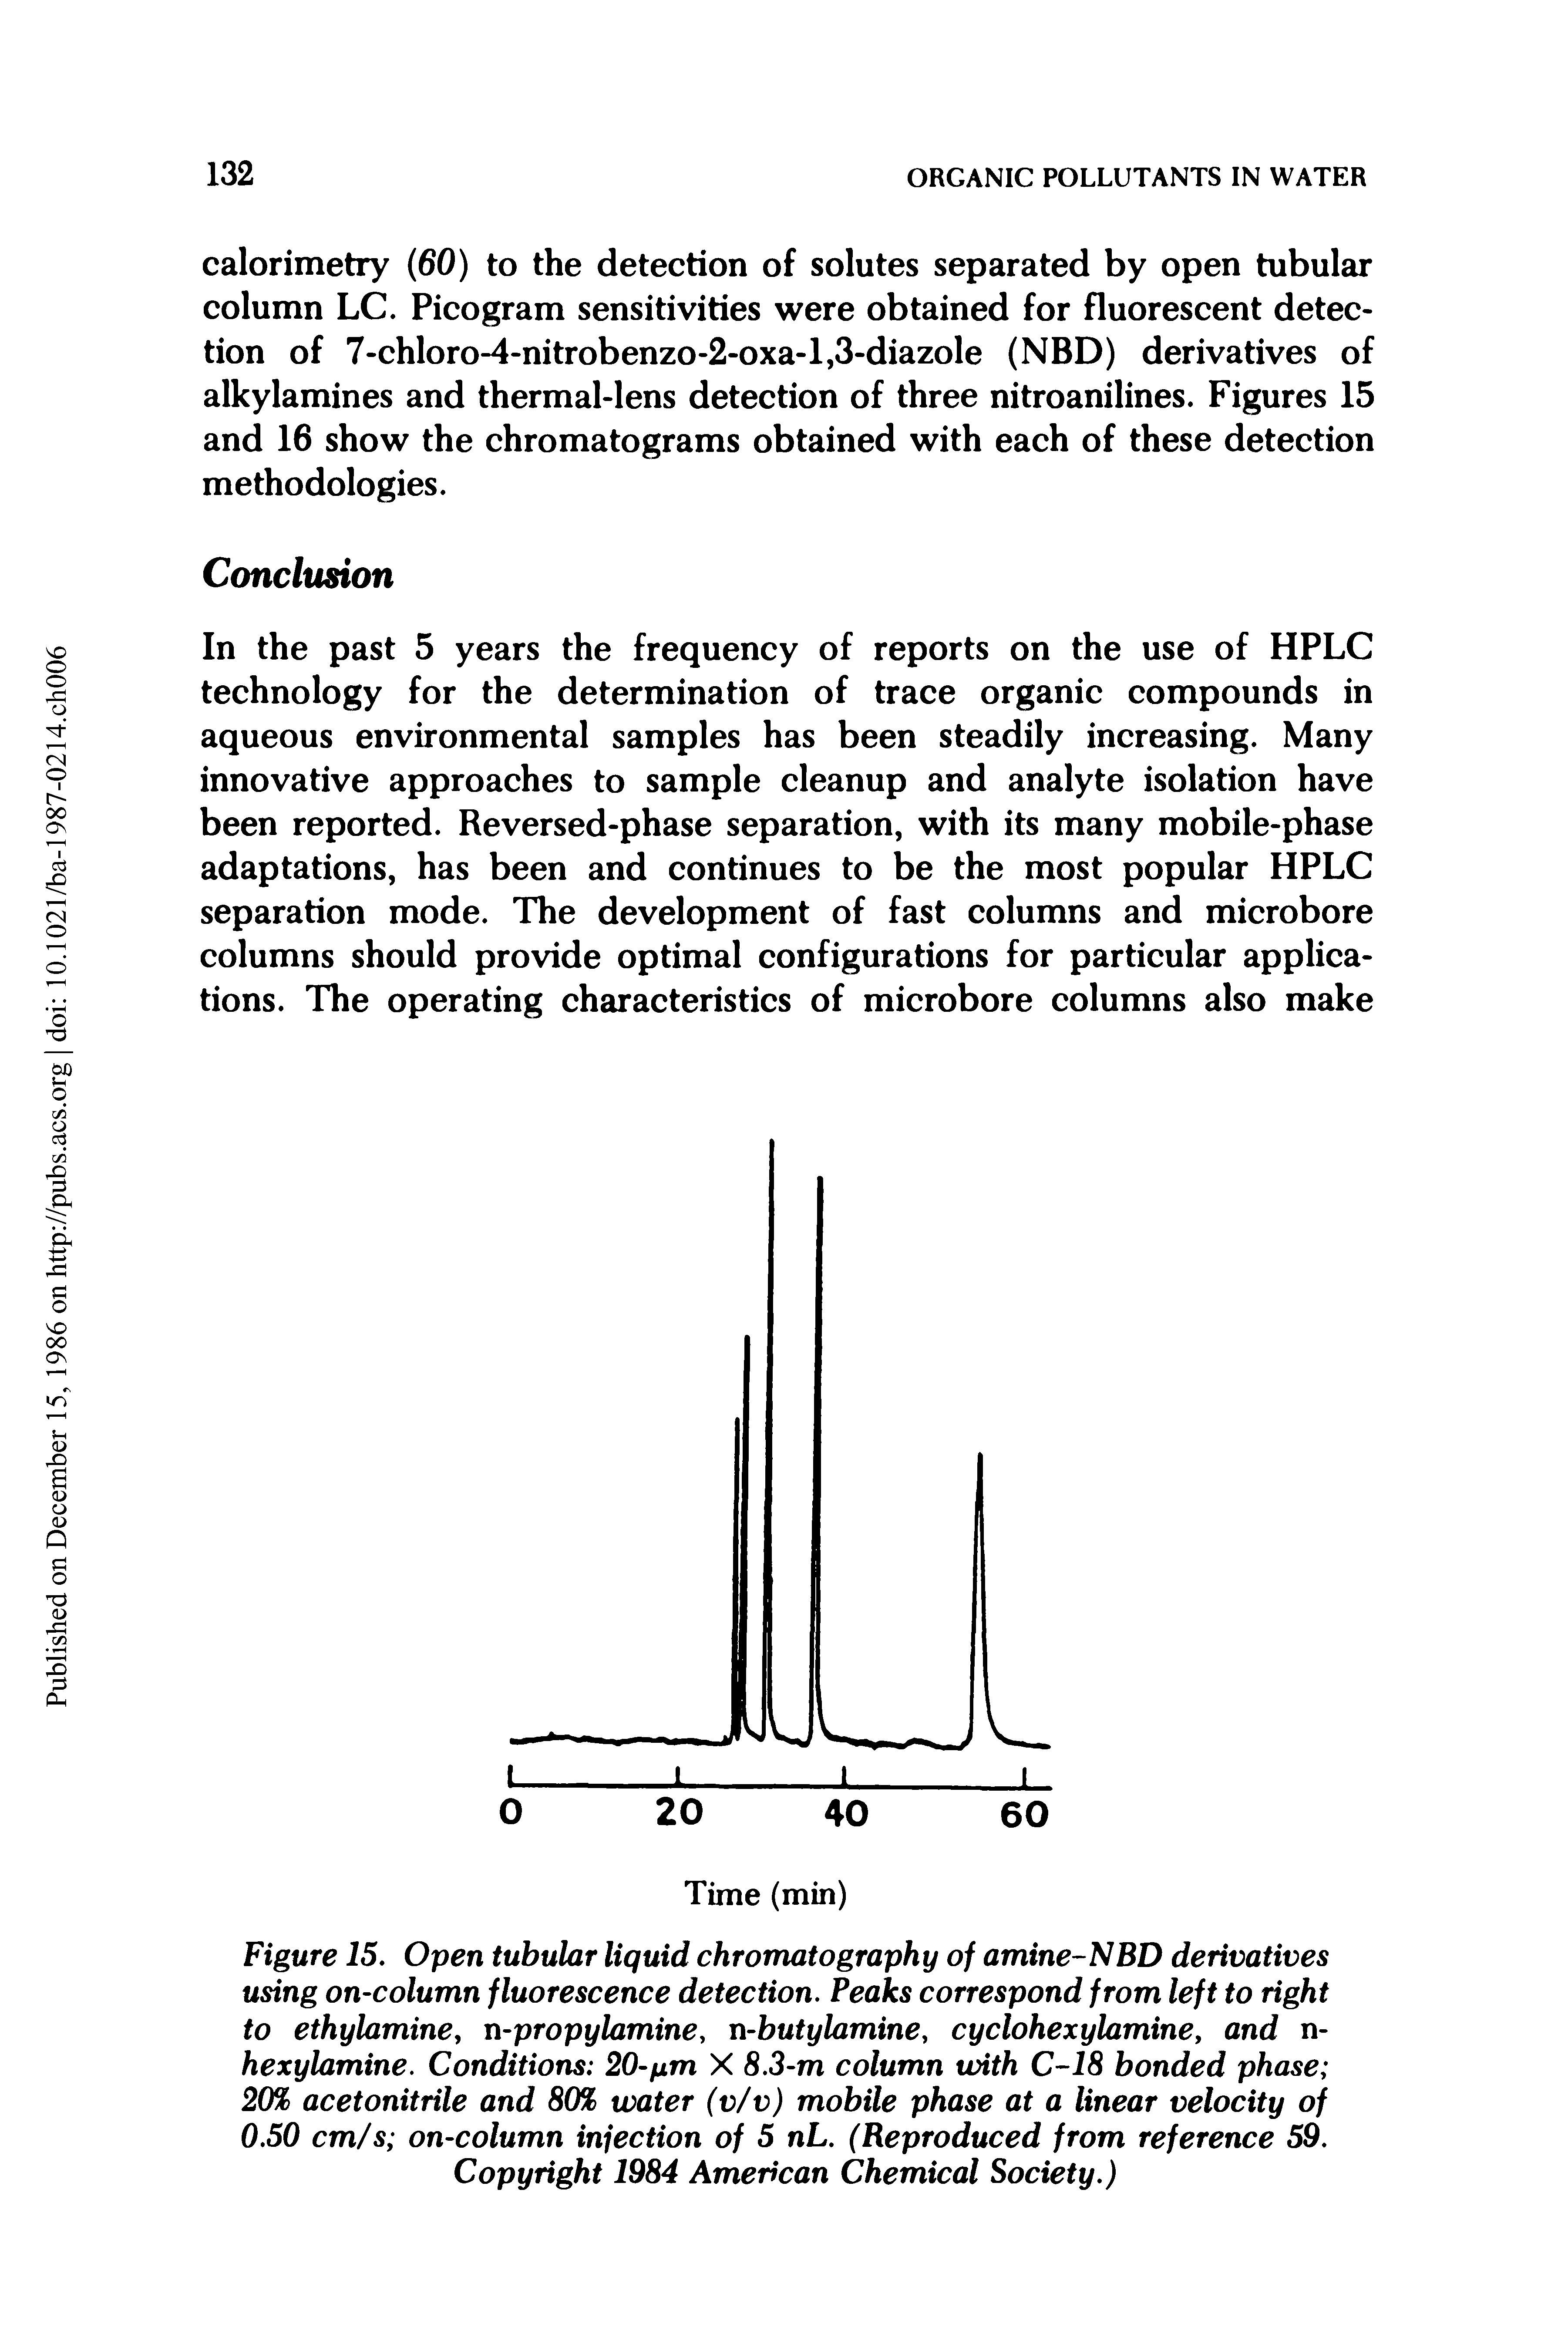 Figure 15. Open tubular liquid chromatography of amine-NBD derivatives using on-column fluorescence detection. Peaks correspond from left to right to ethylamine, n-propylamine, n-butylamine, cyclohexylamine, and n-hexylamine. Conditions 20-p.m X 8.3-m column with C-18 bonded phase 20% acetonitrile and 80% water (v/v) mobile phase at a linear velocity of 0.50 cm/s on-column injection of 5 nL. (Reproduced from reference 59. Copyright 1984 American Chemical Society.)...